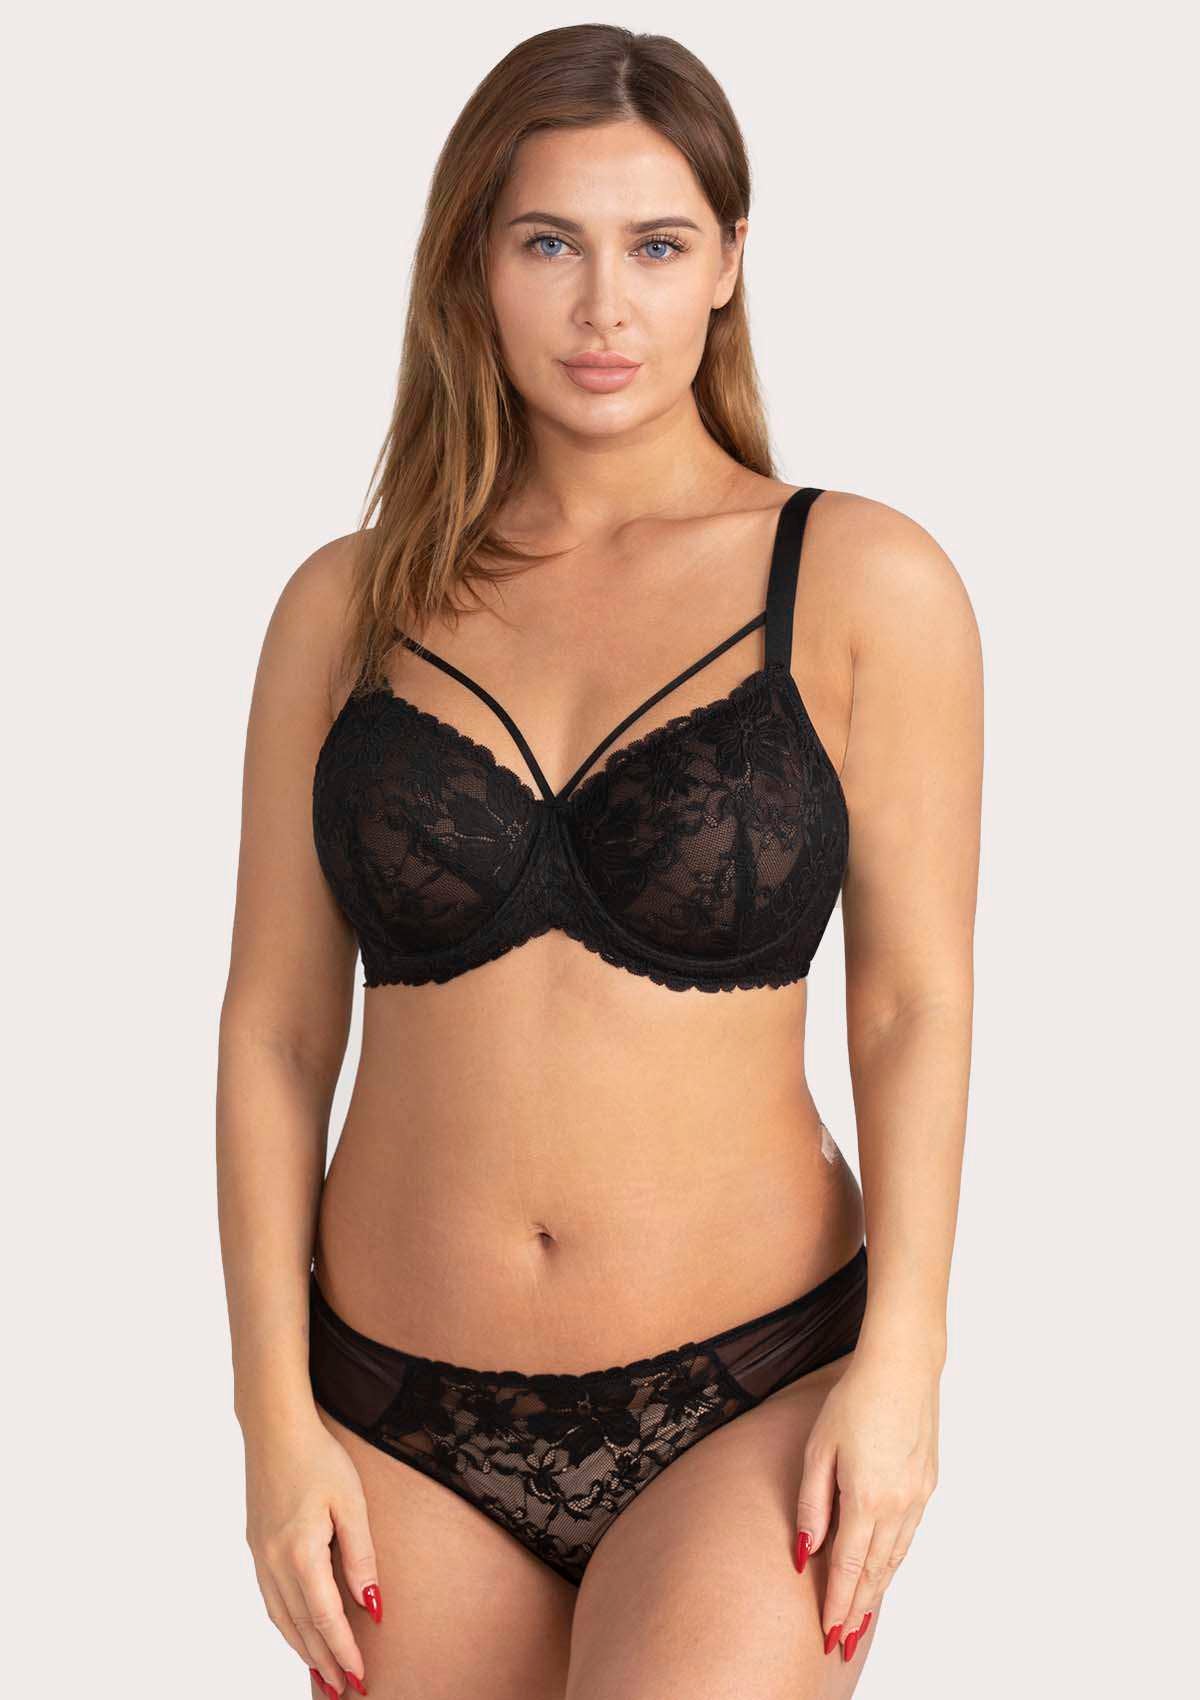 HSIA Pretty In Petals Lace Bra And Panty Set: Non Padded Wired Bra - Black / 46 / G